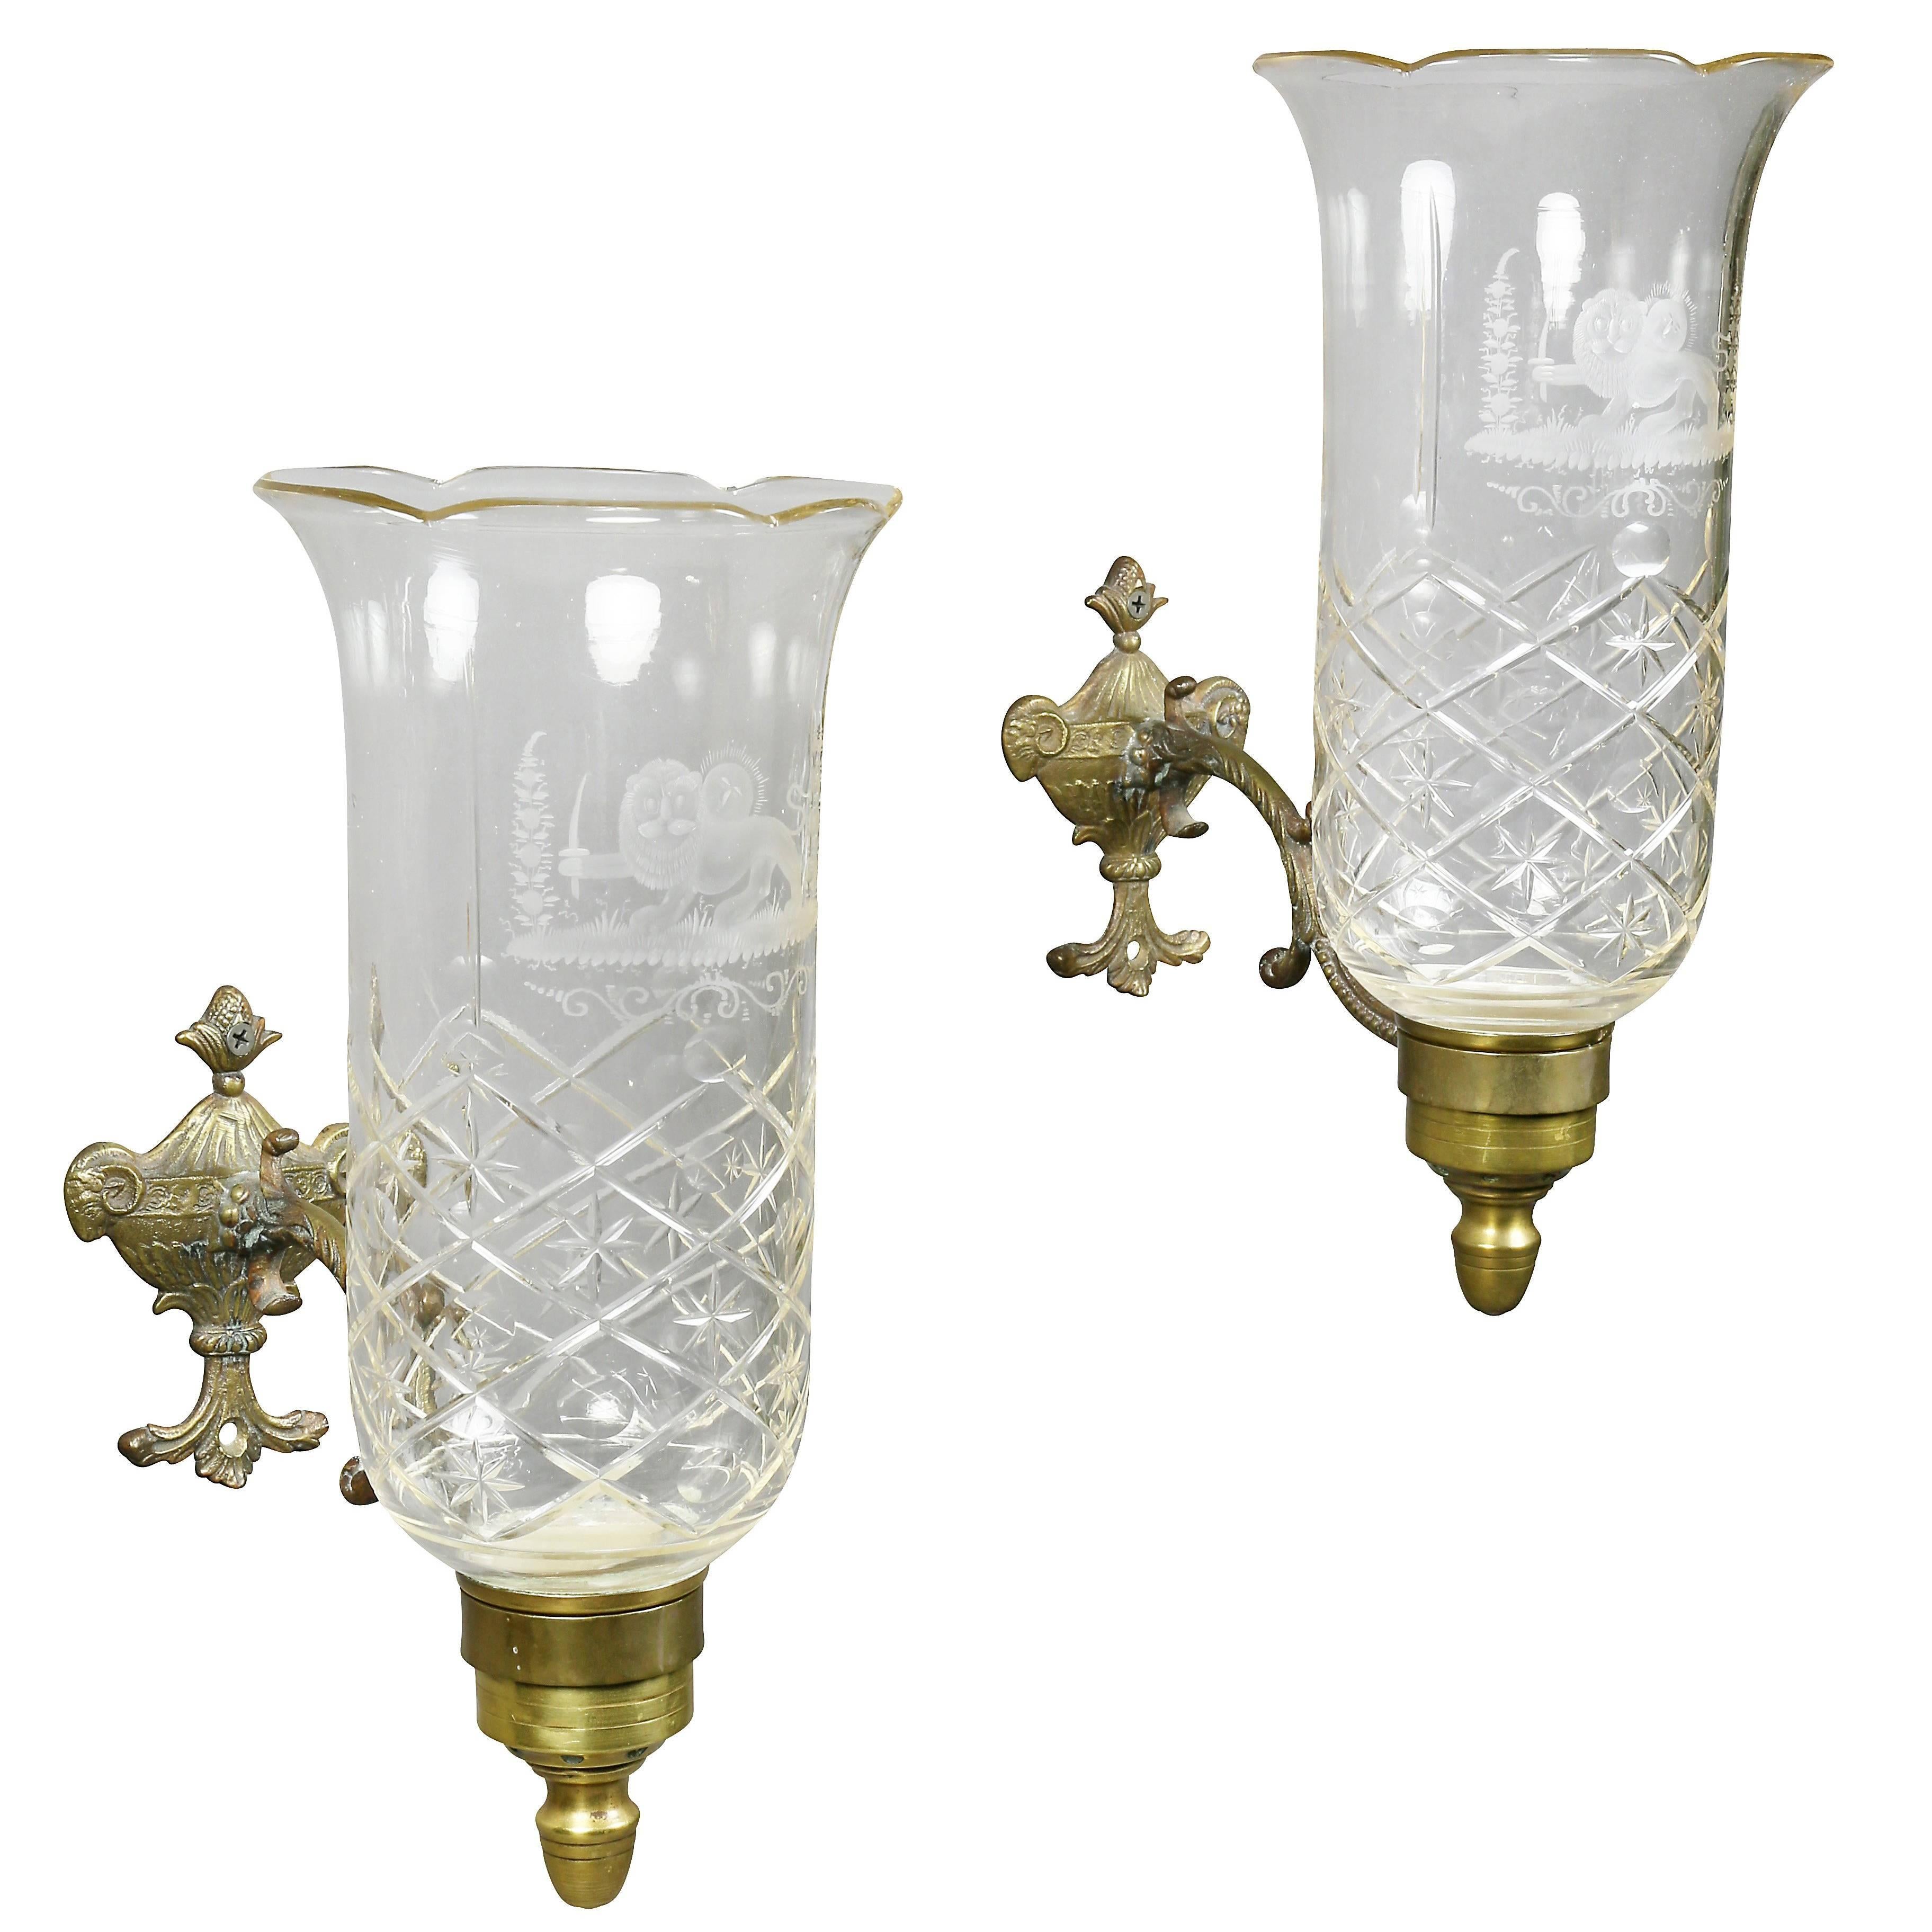 Pair of Regency Brass, Etched and Cut-Glass Hurricane Wall Sconces